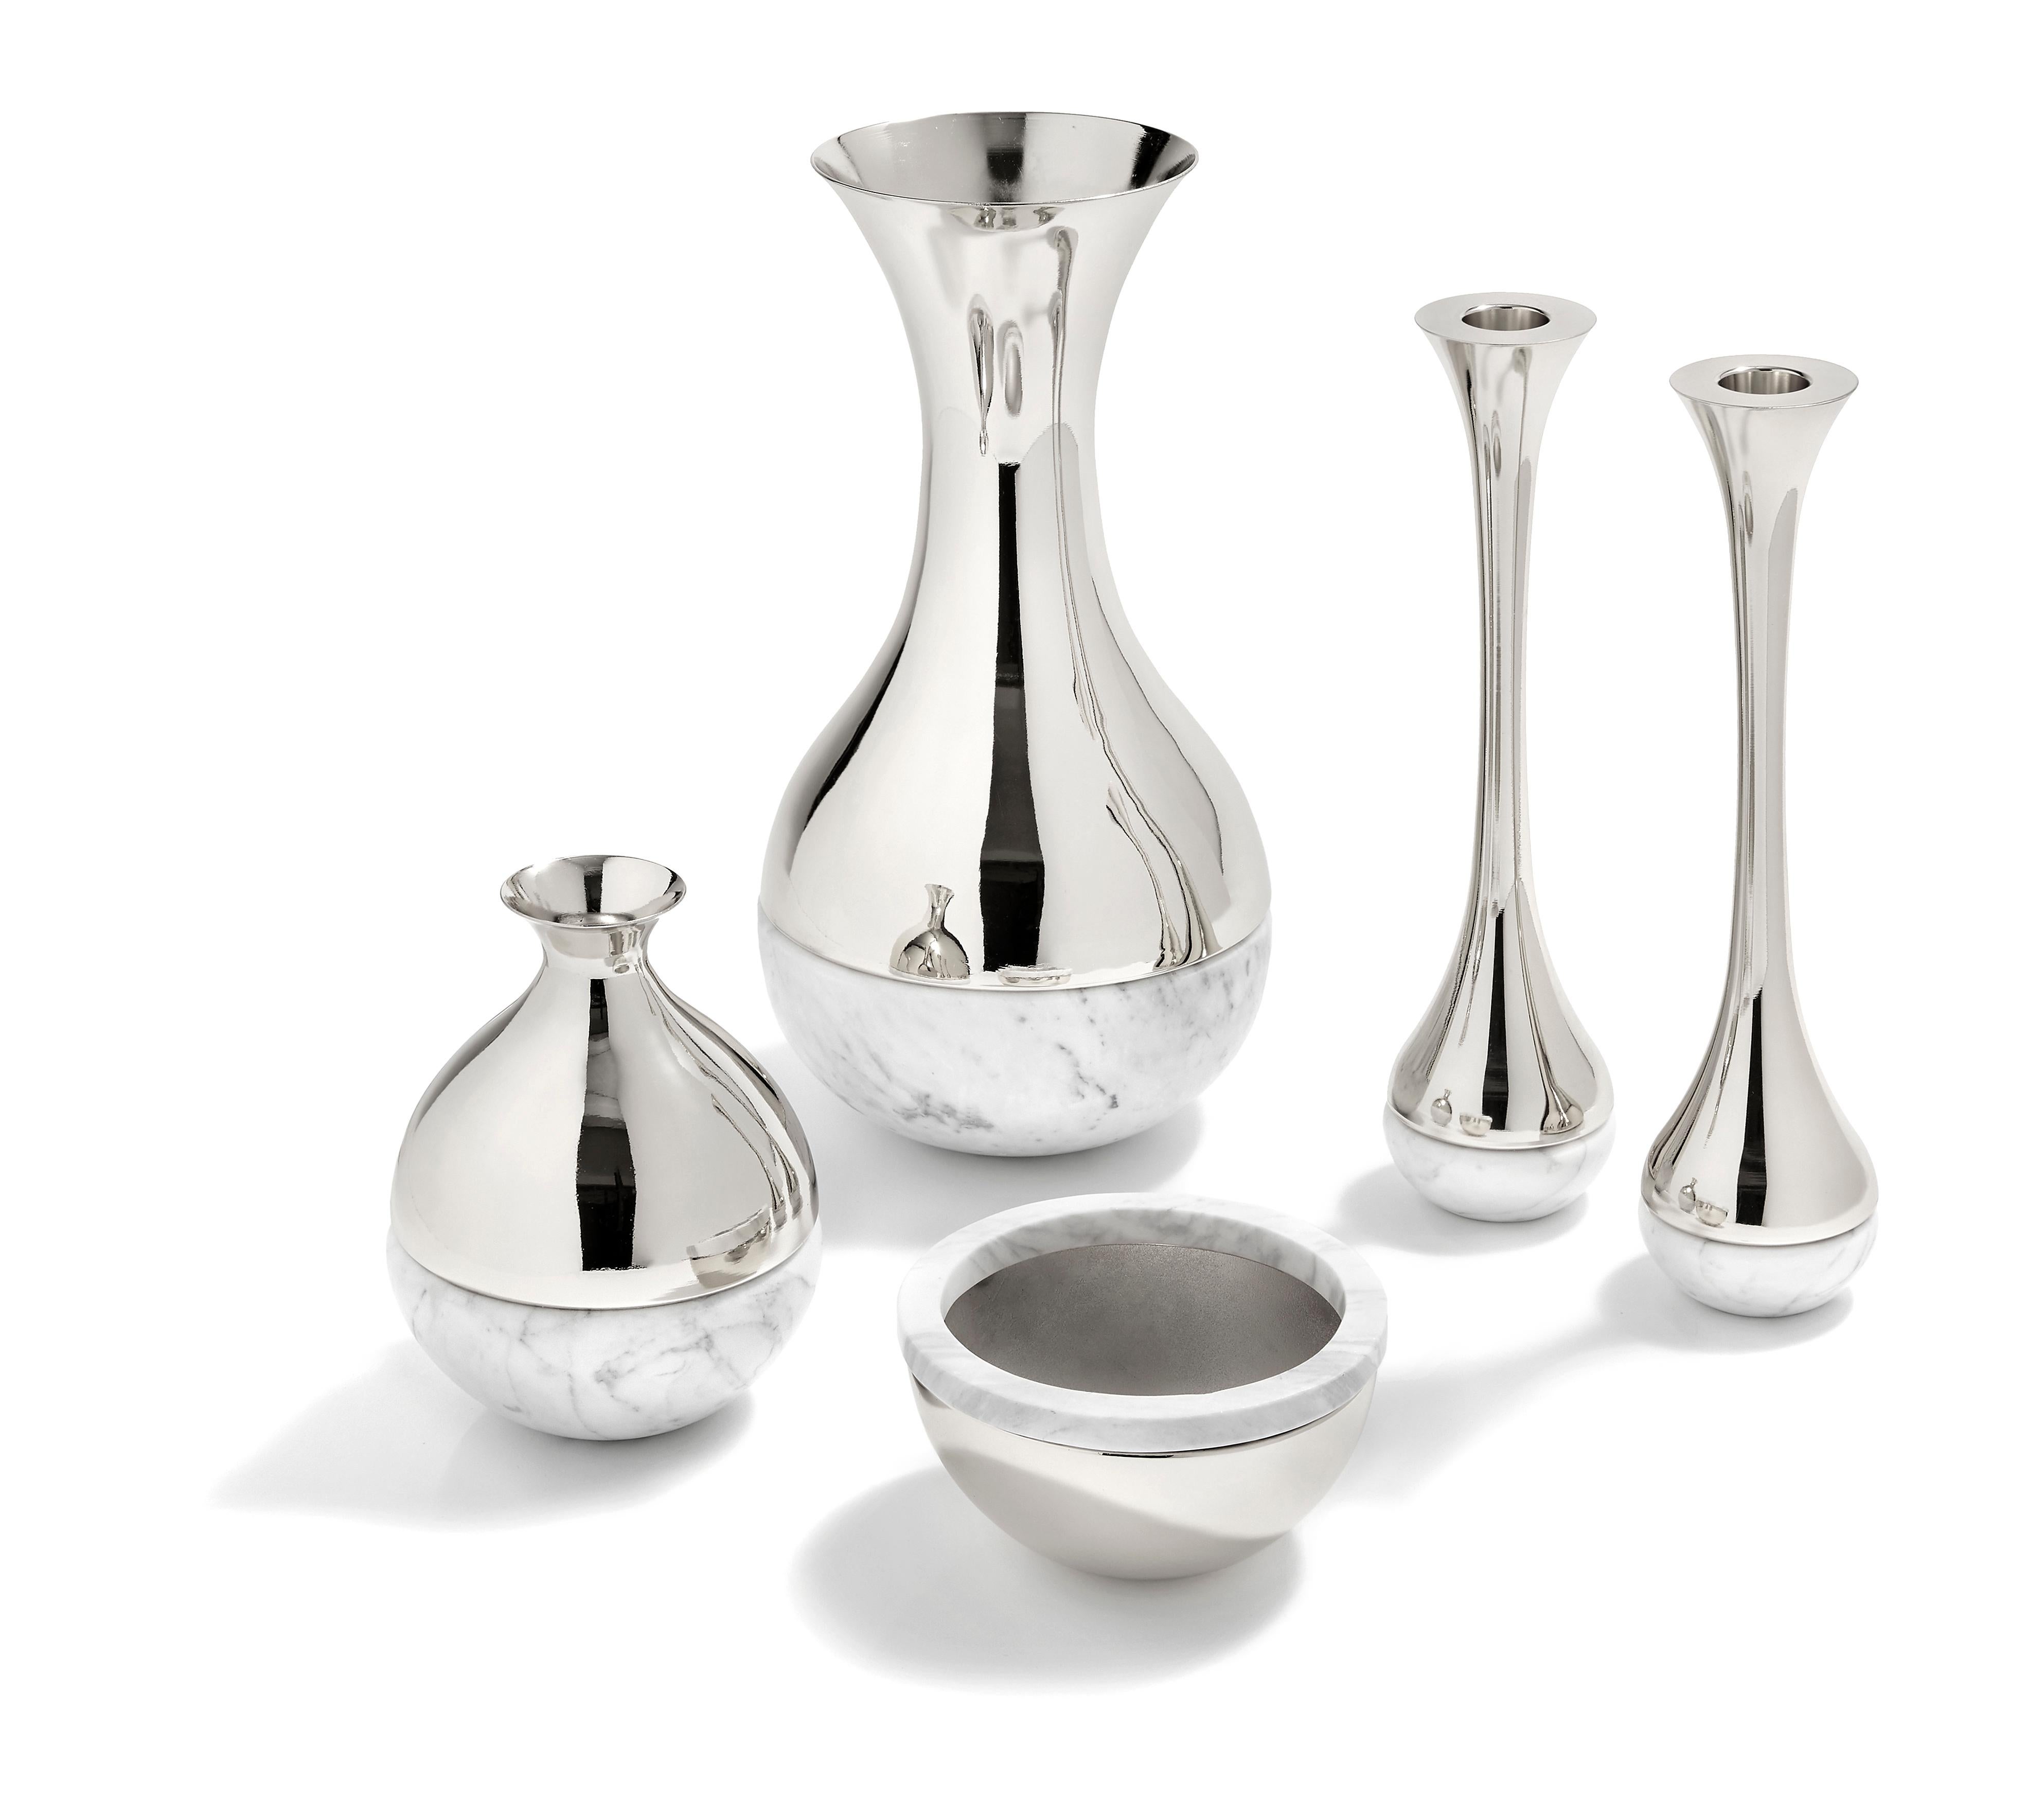 Our Dual collection unites two very different material, honed Italian marble, and polished metal. It is designed to create moments of grace: a bud-vase that holds a single stem of one's favorite flower, candlesticks that adorn the table when friends